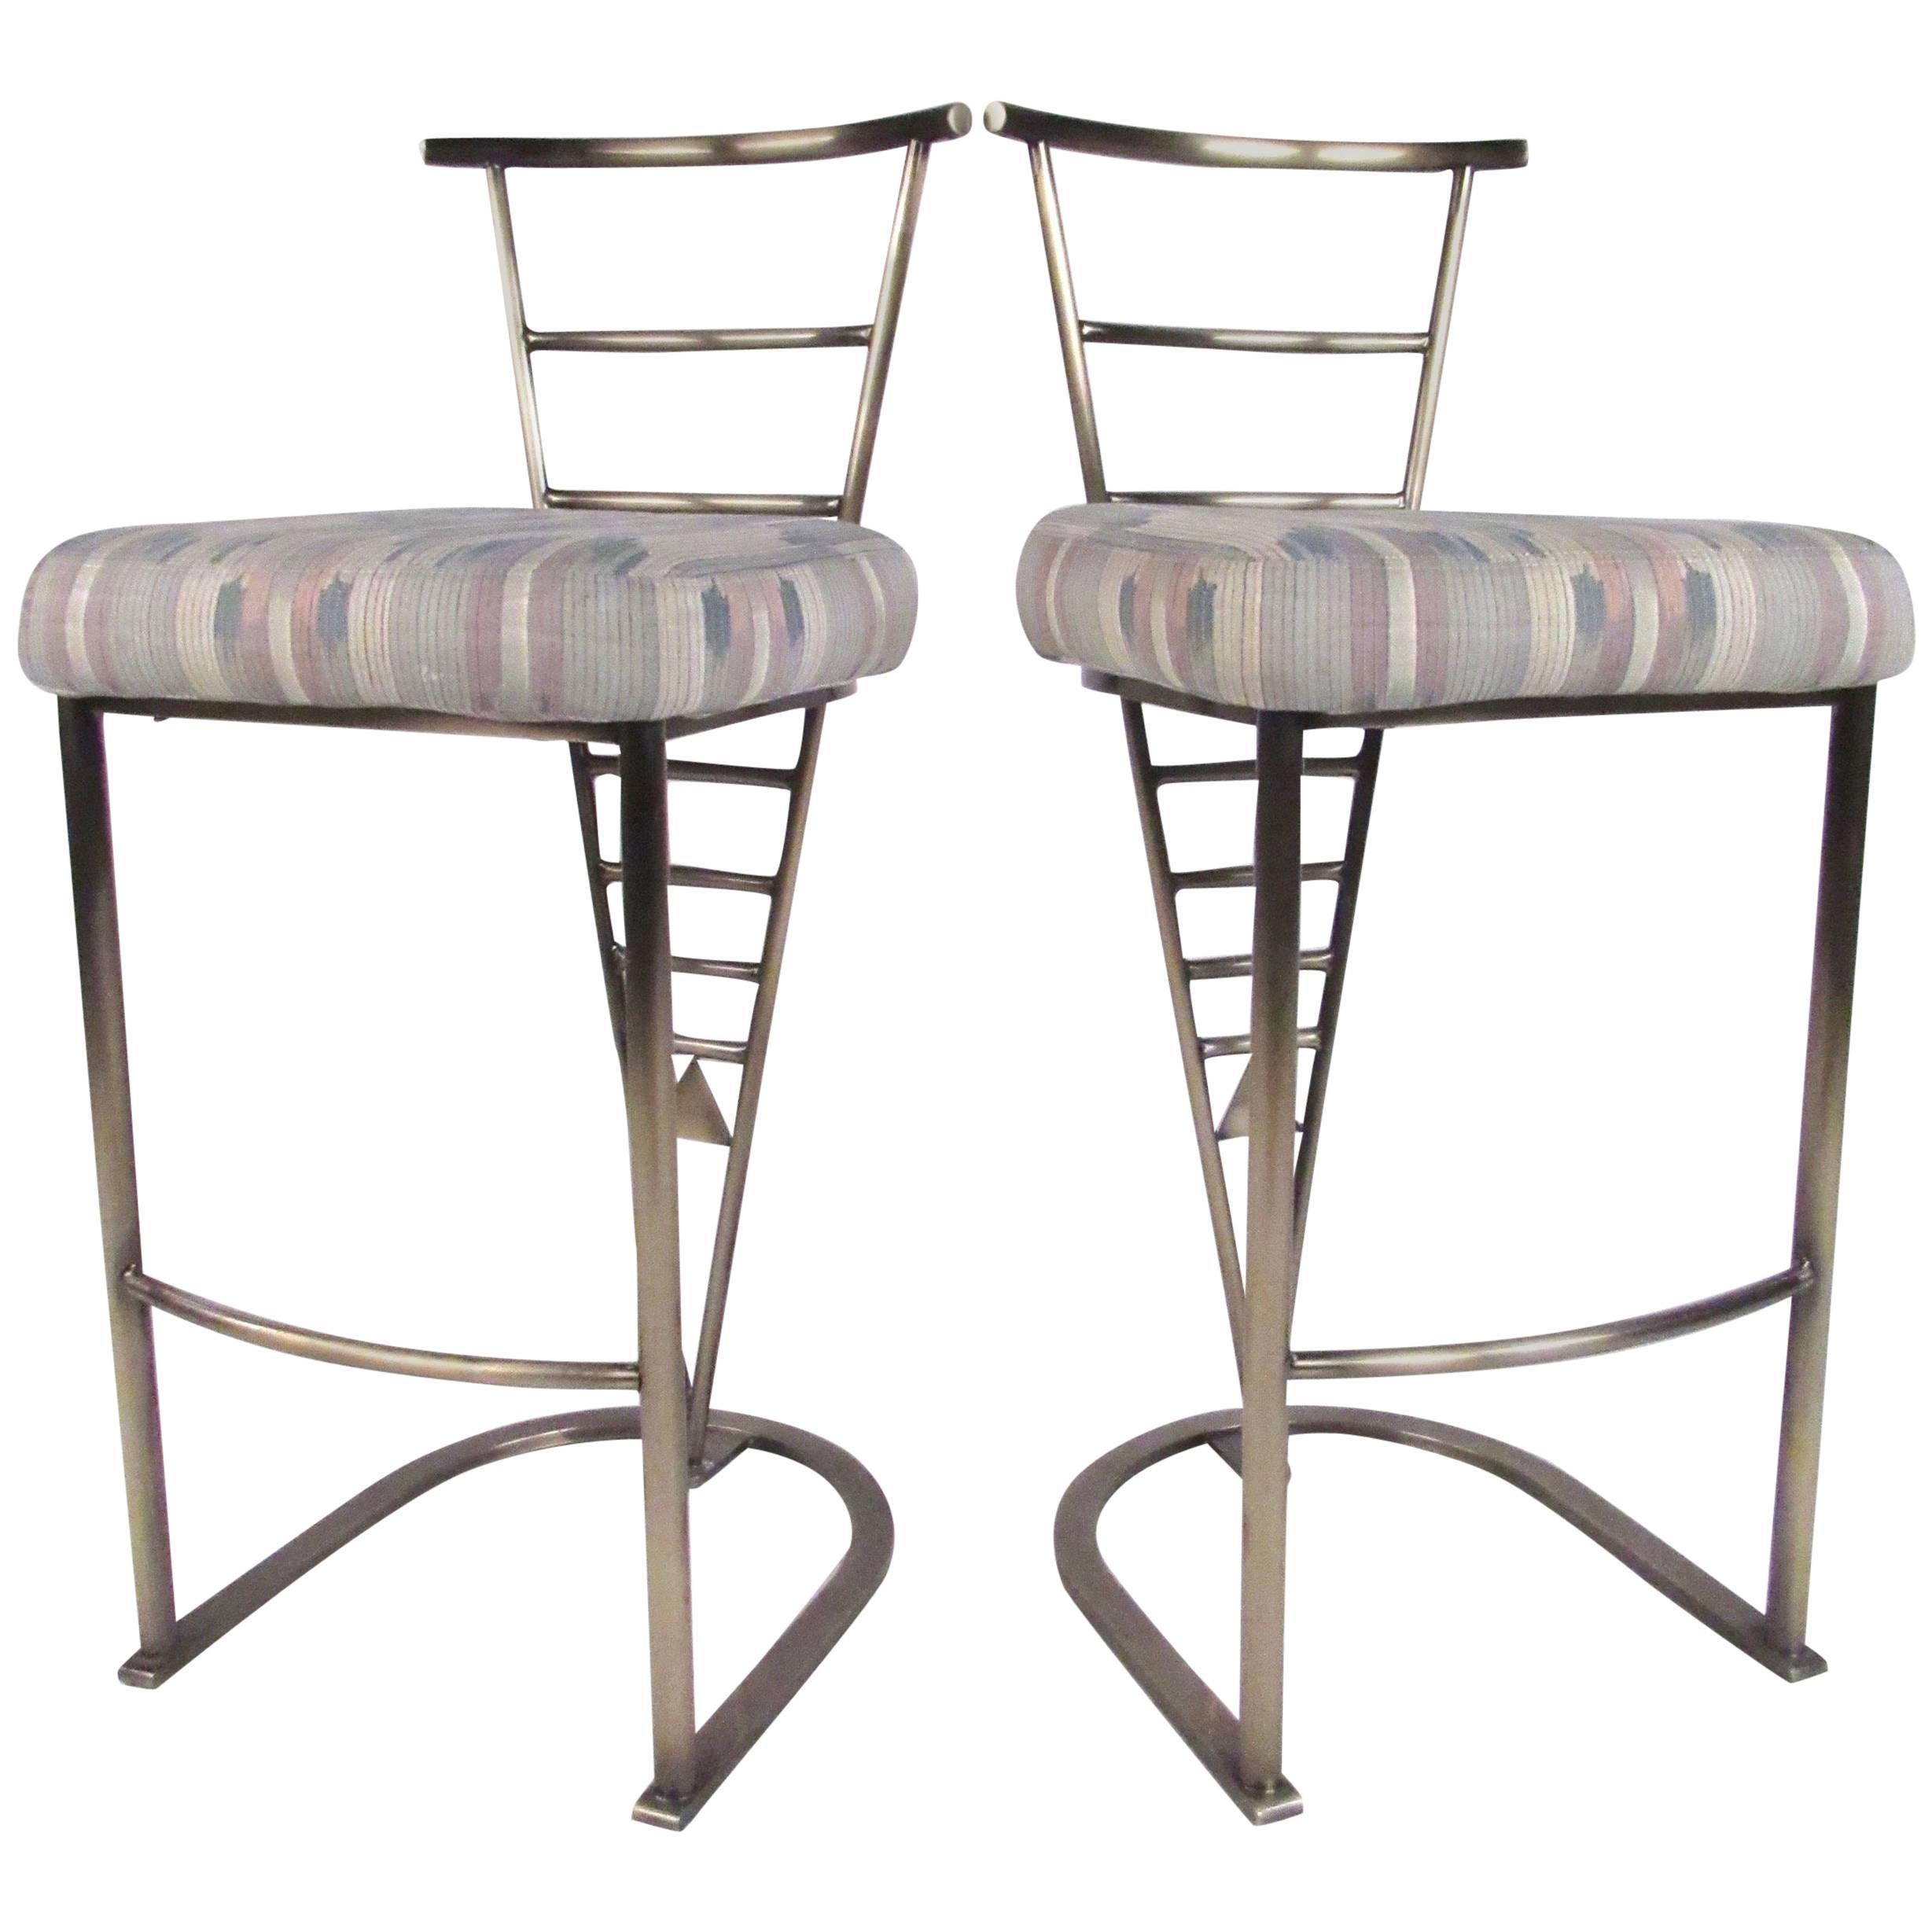 Pair of Contemporary Modern Bar Stools by DIA